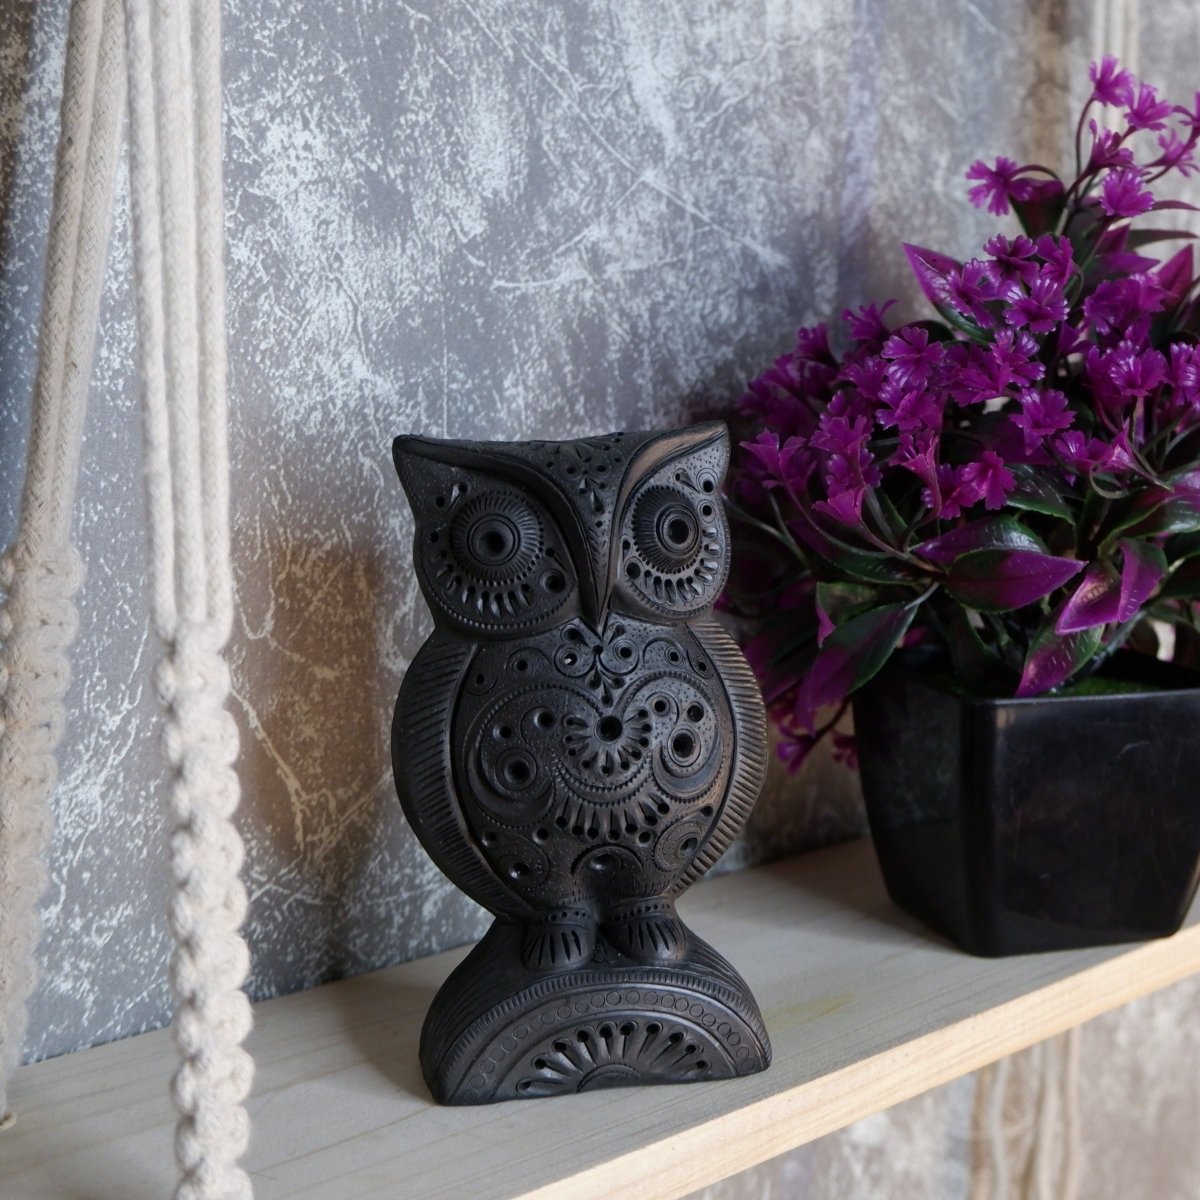 Vintage owl handcrafted to perfection -decor-Sowpeace-Vintage owl handcrafted to perfection -decor-Sowpeace-Vintage owl handcrafted to perfection-Terr/bter/TT/AOW-Sowpeace-TerrbterTTAOW-Sowpeace